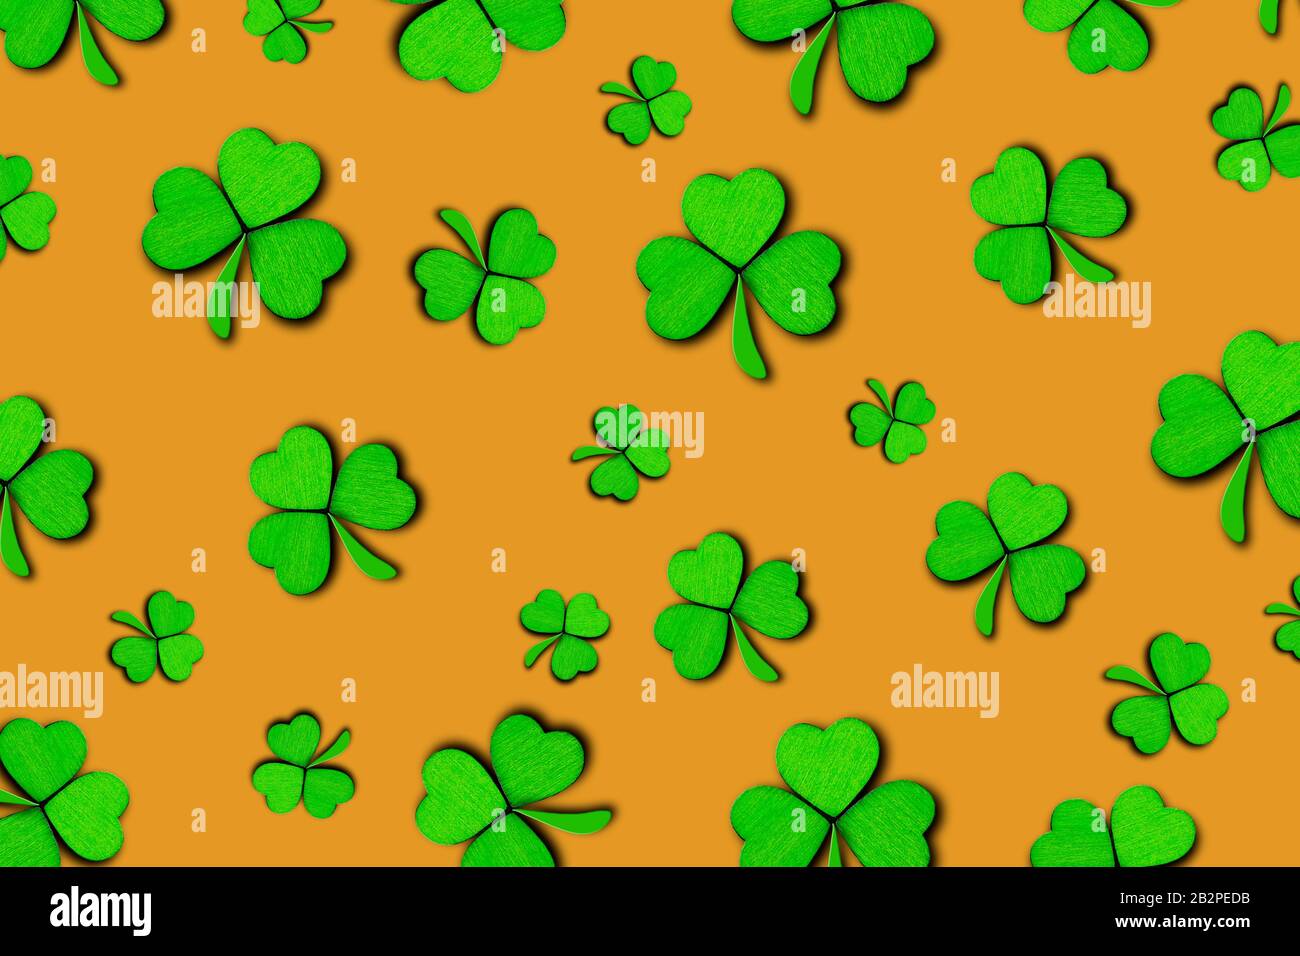 Pattern of green clovers or shamrocks isolated on orange background. St. Patrick's Day Holiday concept. Spring background. Stock Photo